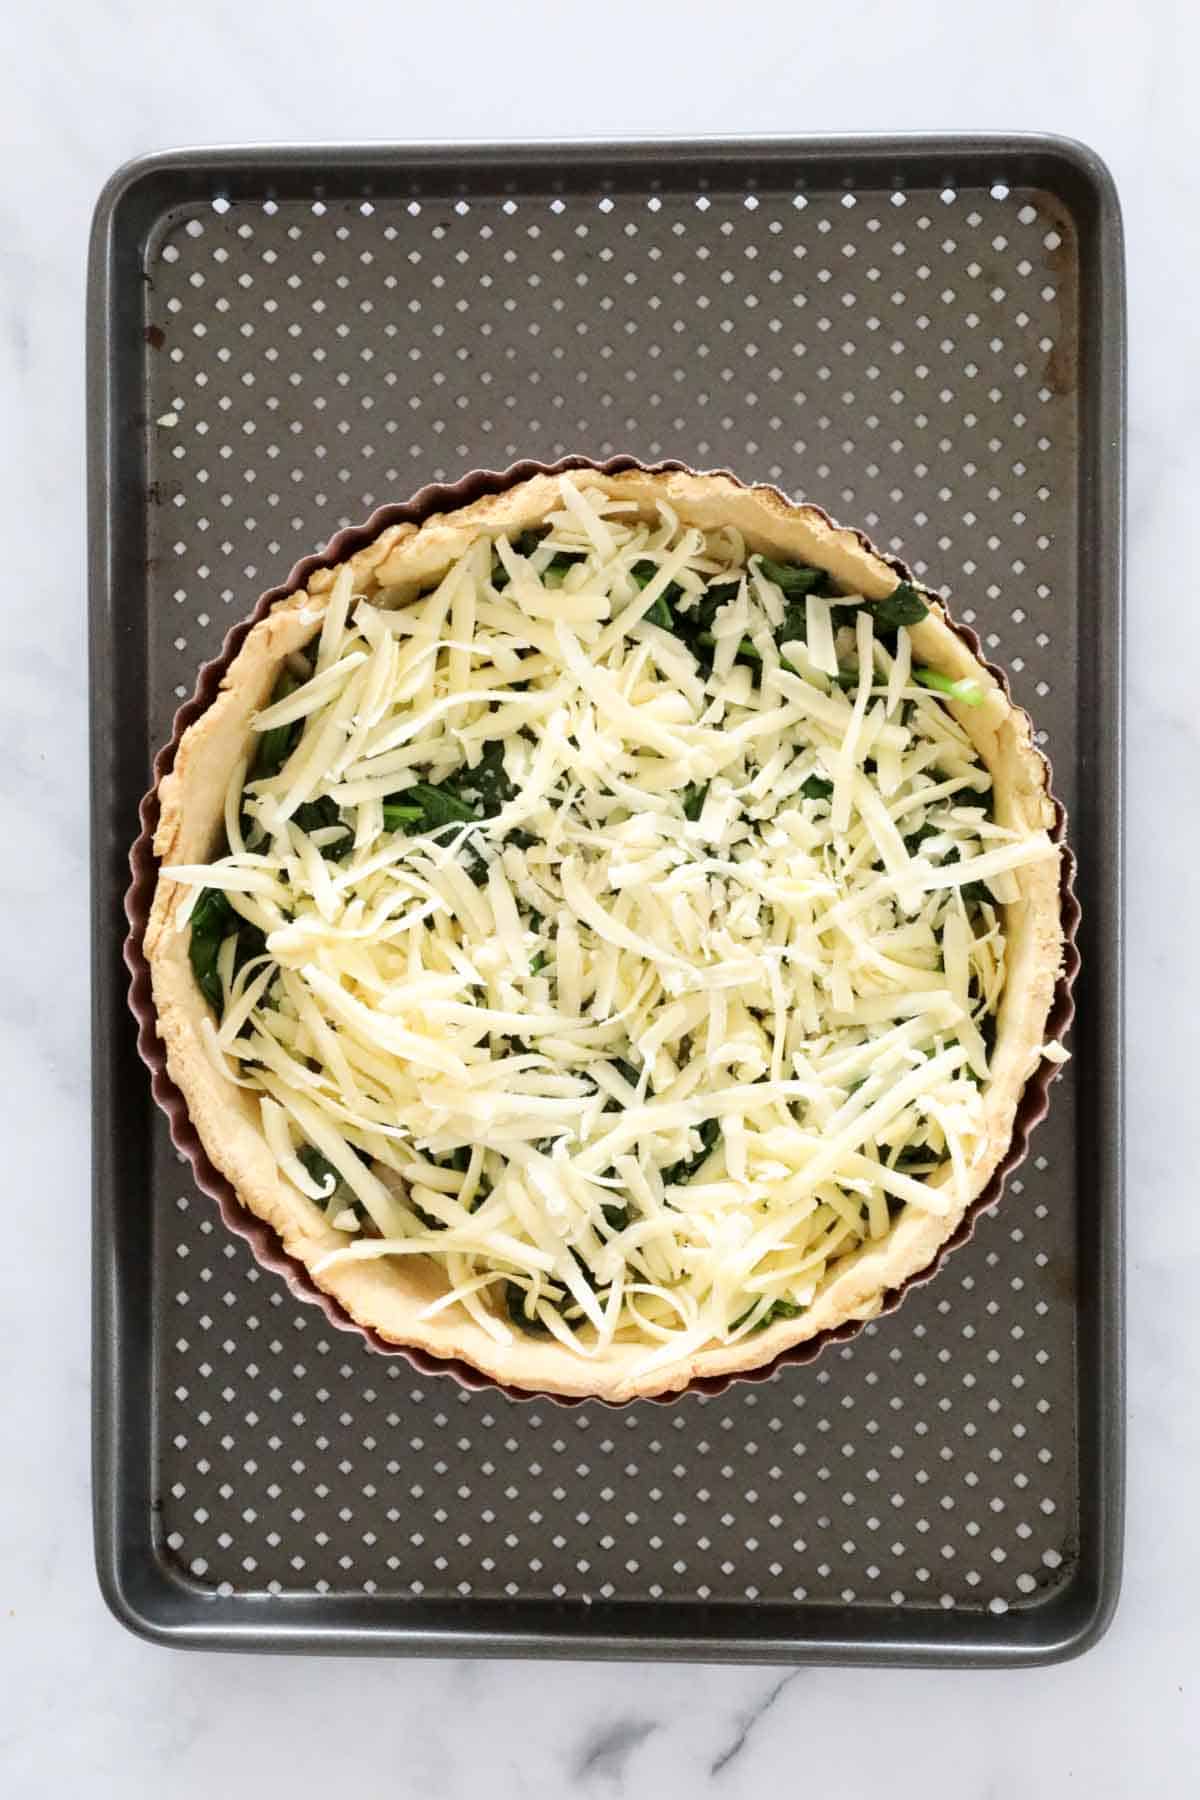 Grated cheese sprinkled over spinach in pastry shell.